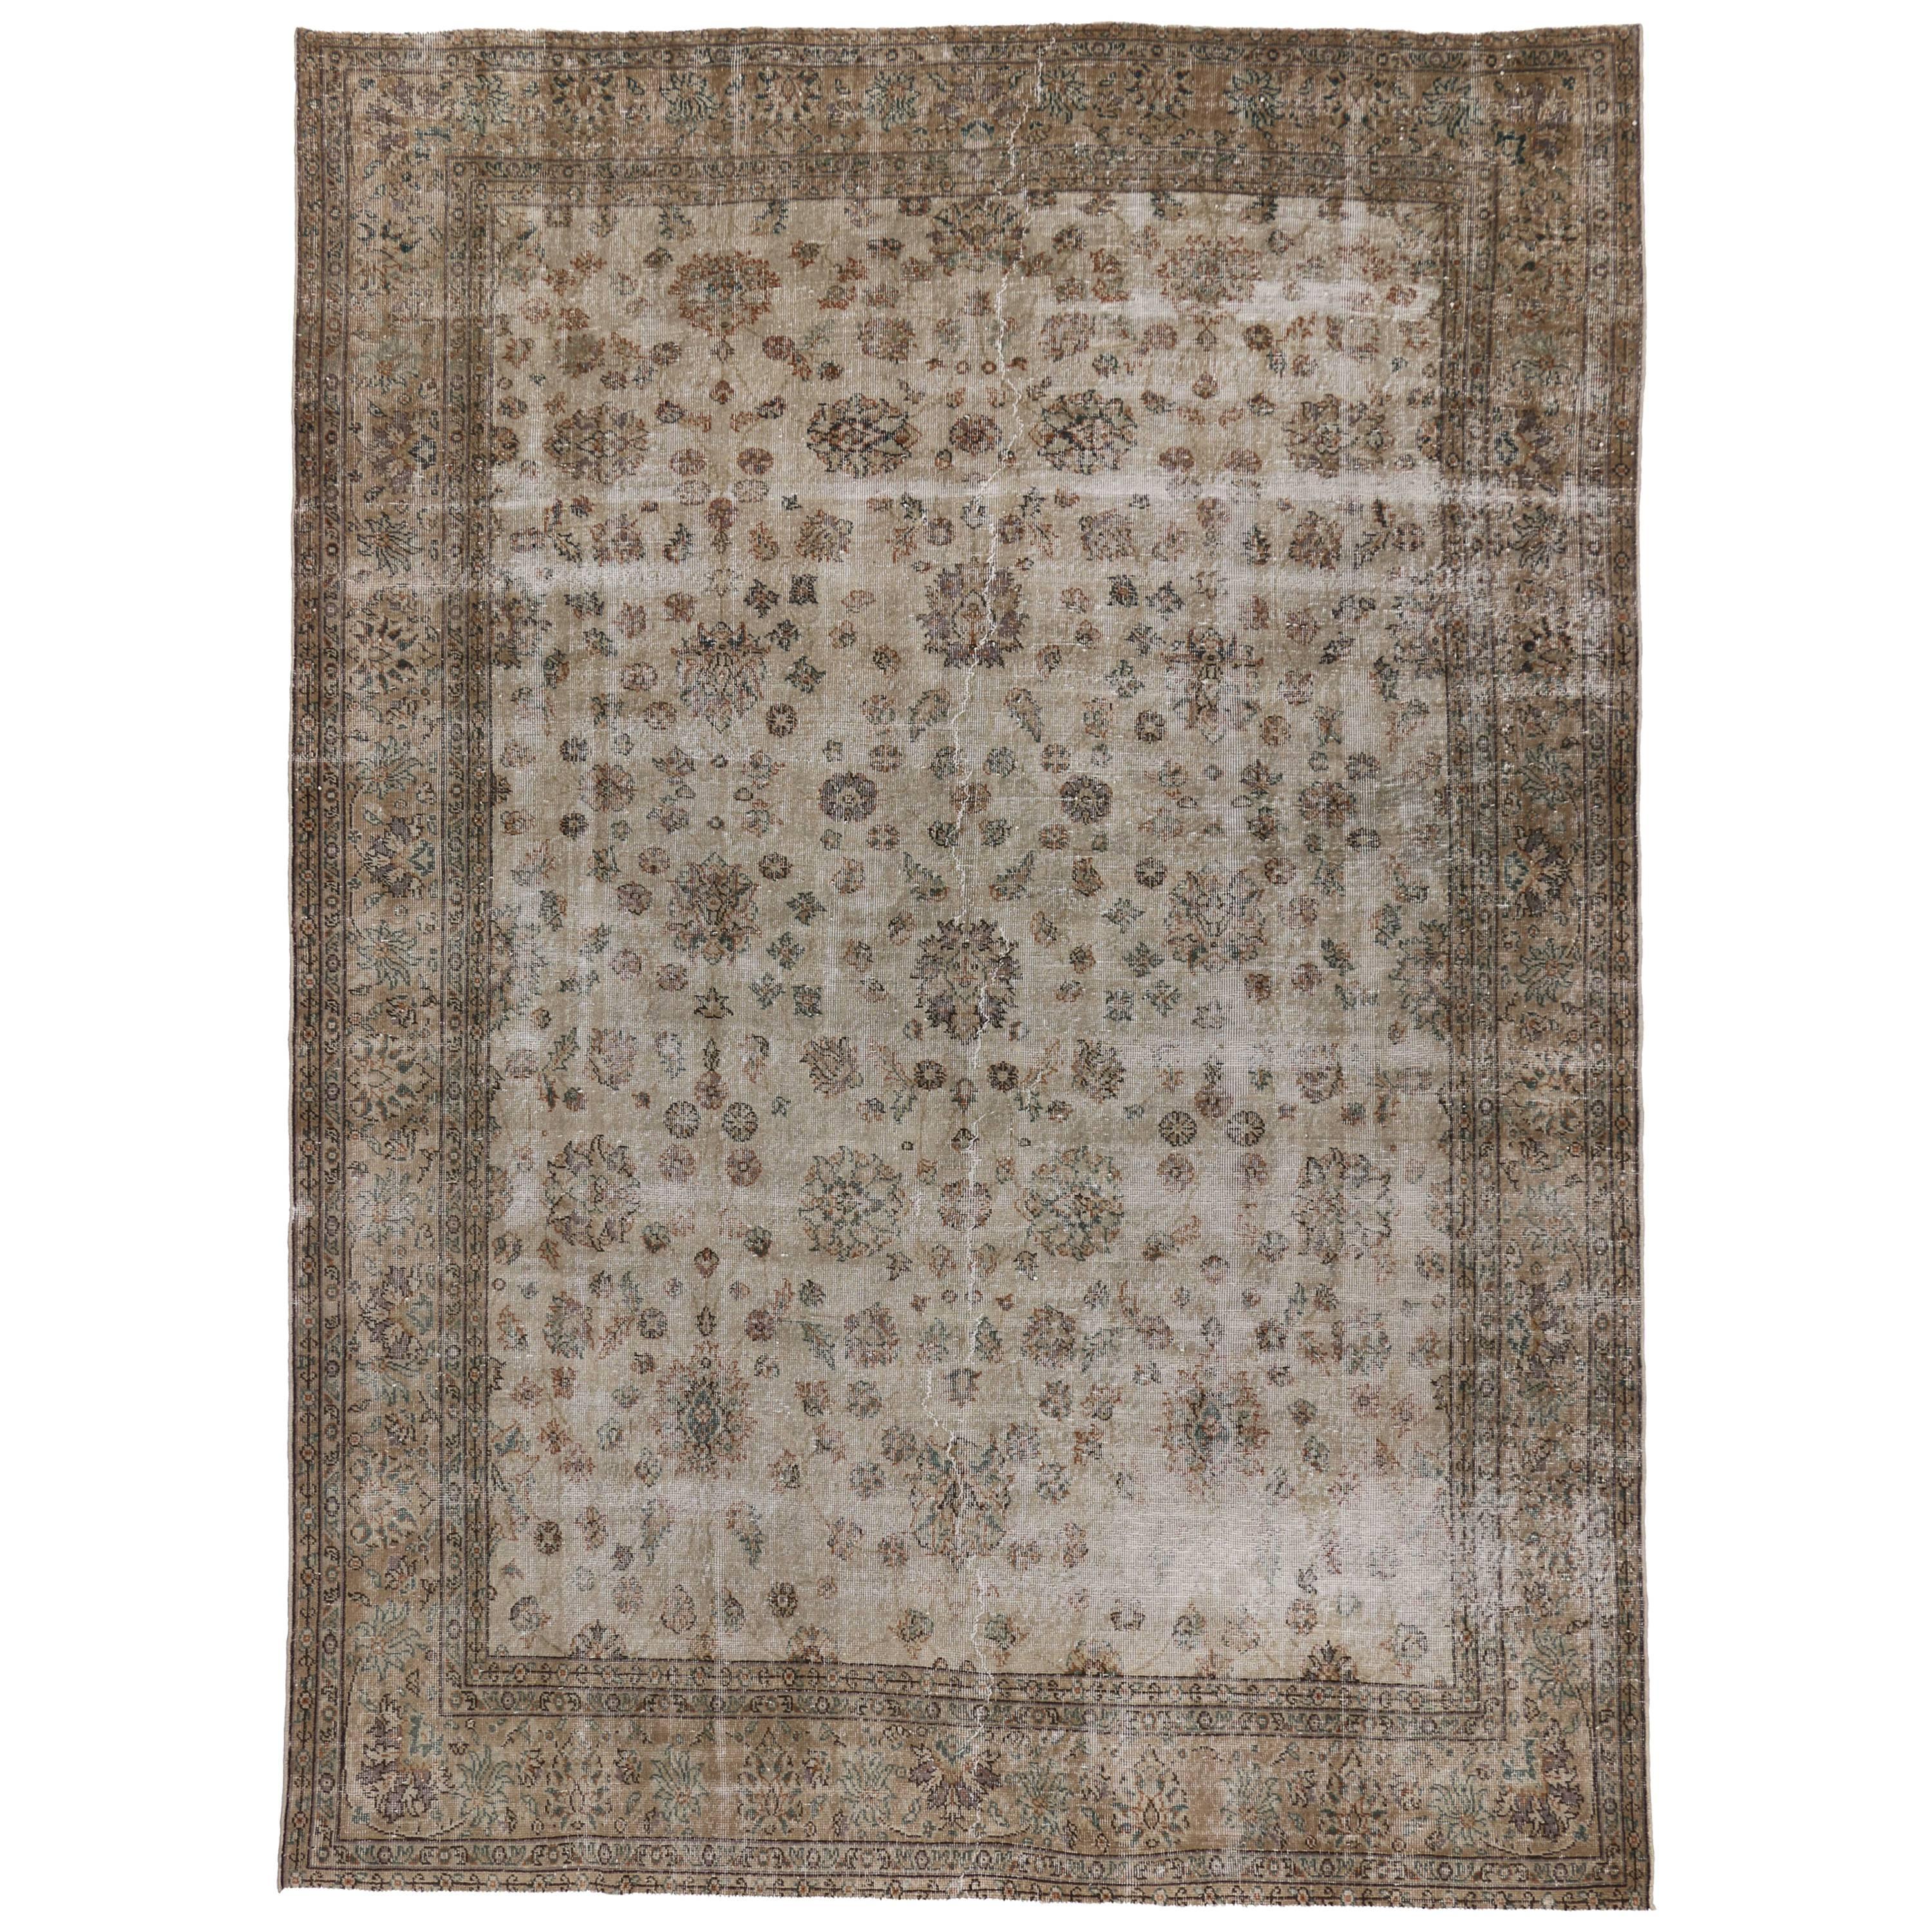 Distressed Sivas Rug with Shabby Chic Farmhouse Style